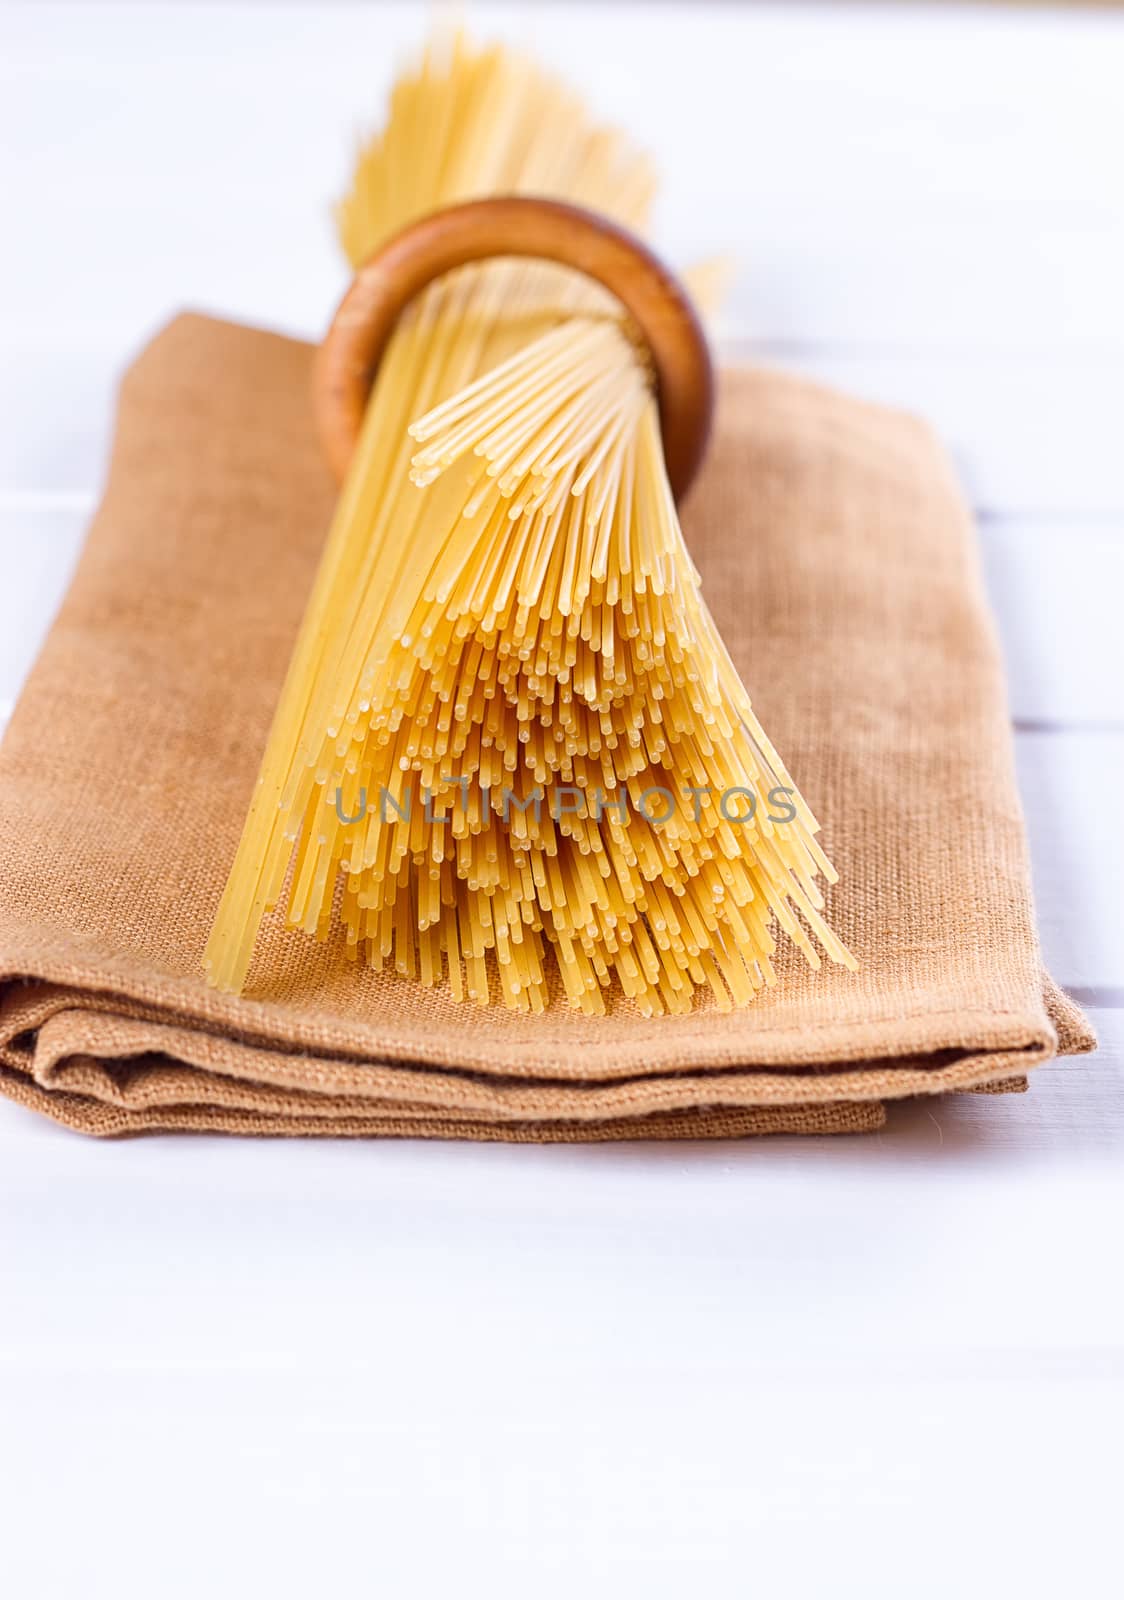 uncooked pasta on a cloth by victosha